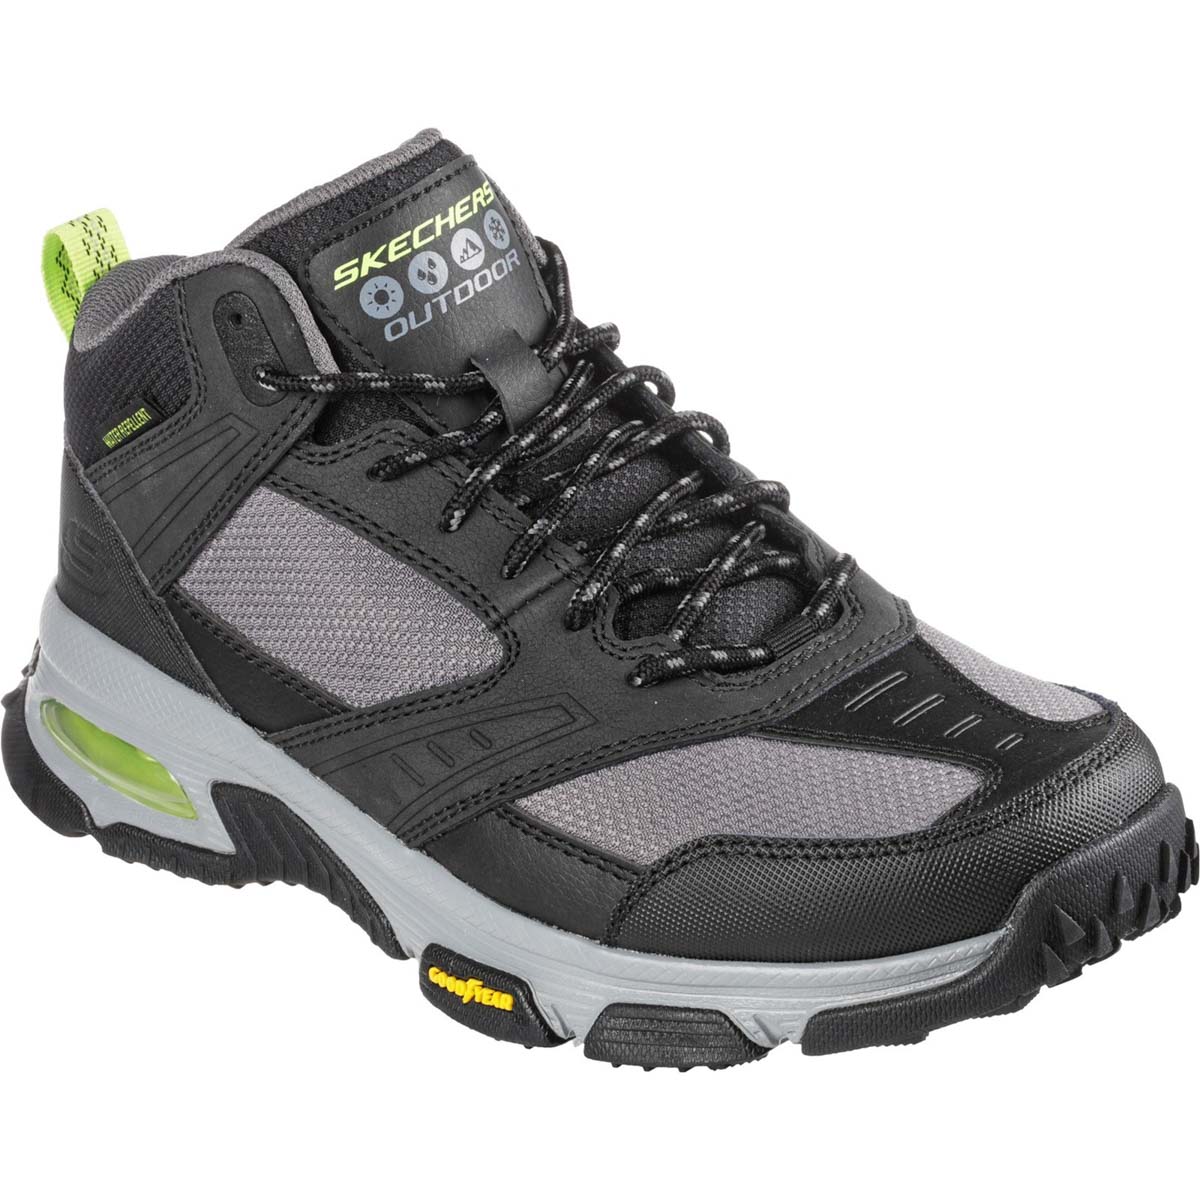 Skechers Skech-Air Envoy Boot Black Charcoal Grey Mens Outdoor Walking Boots 237215 In Size 8 In Plain Black Charcoal Grey